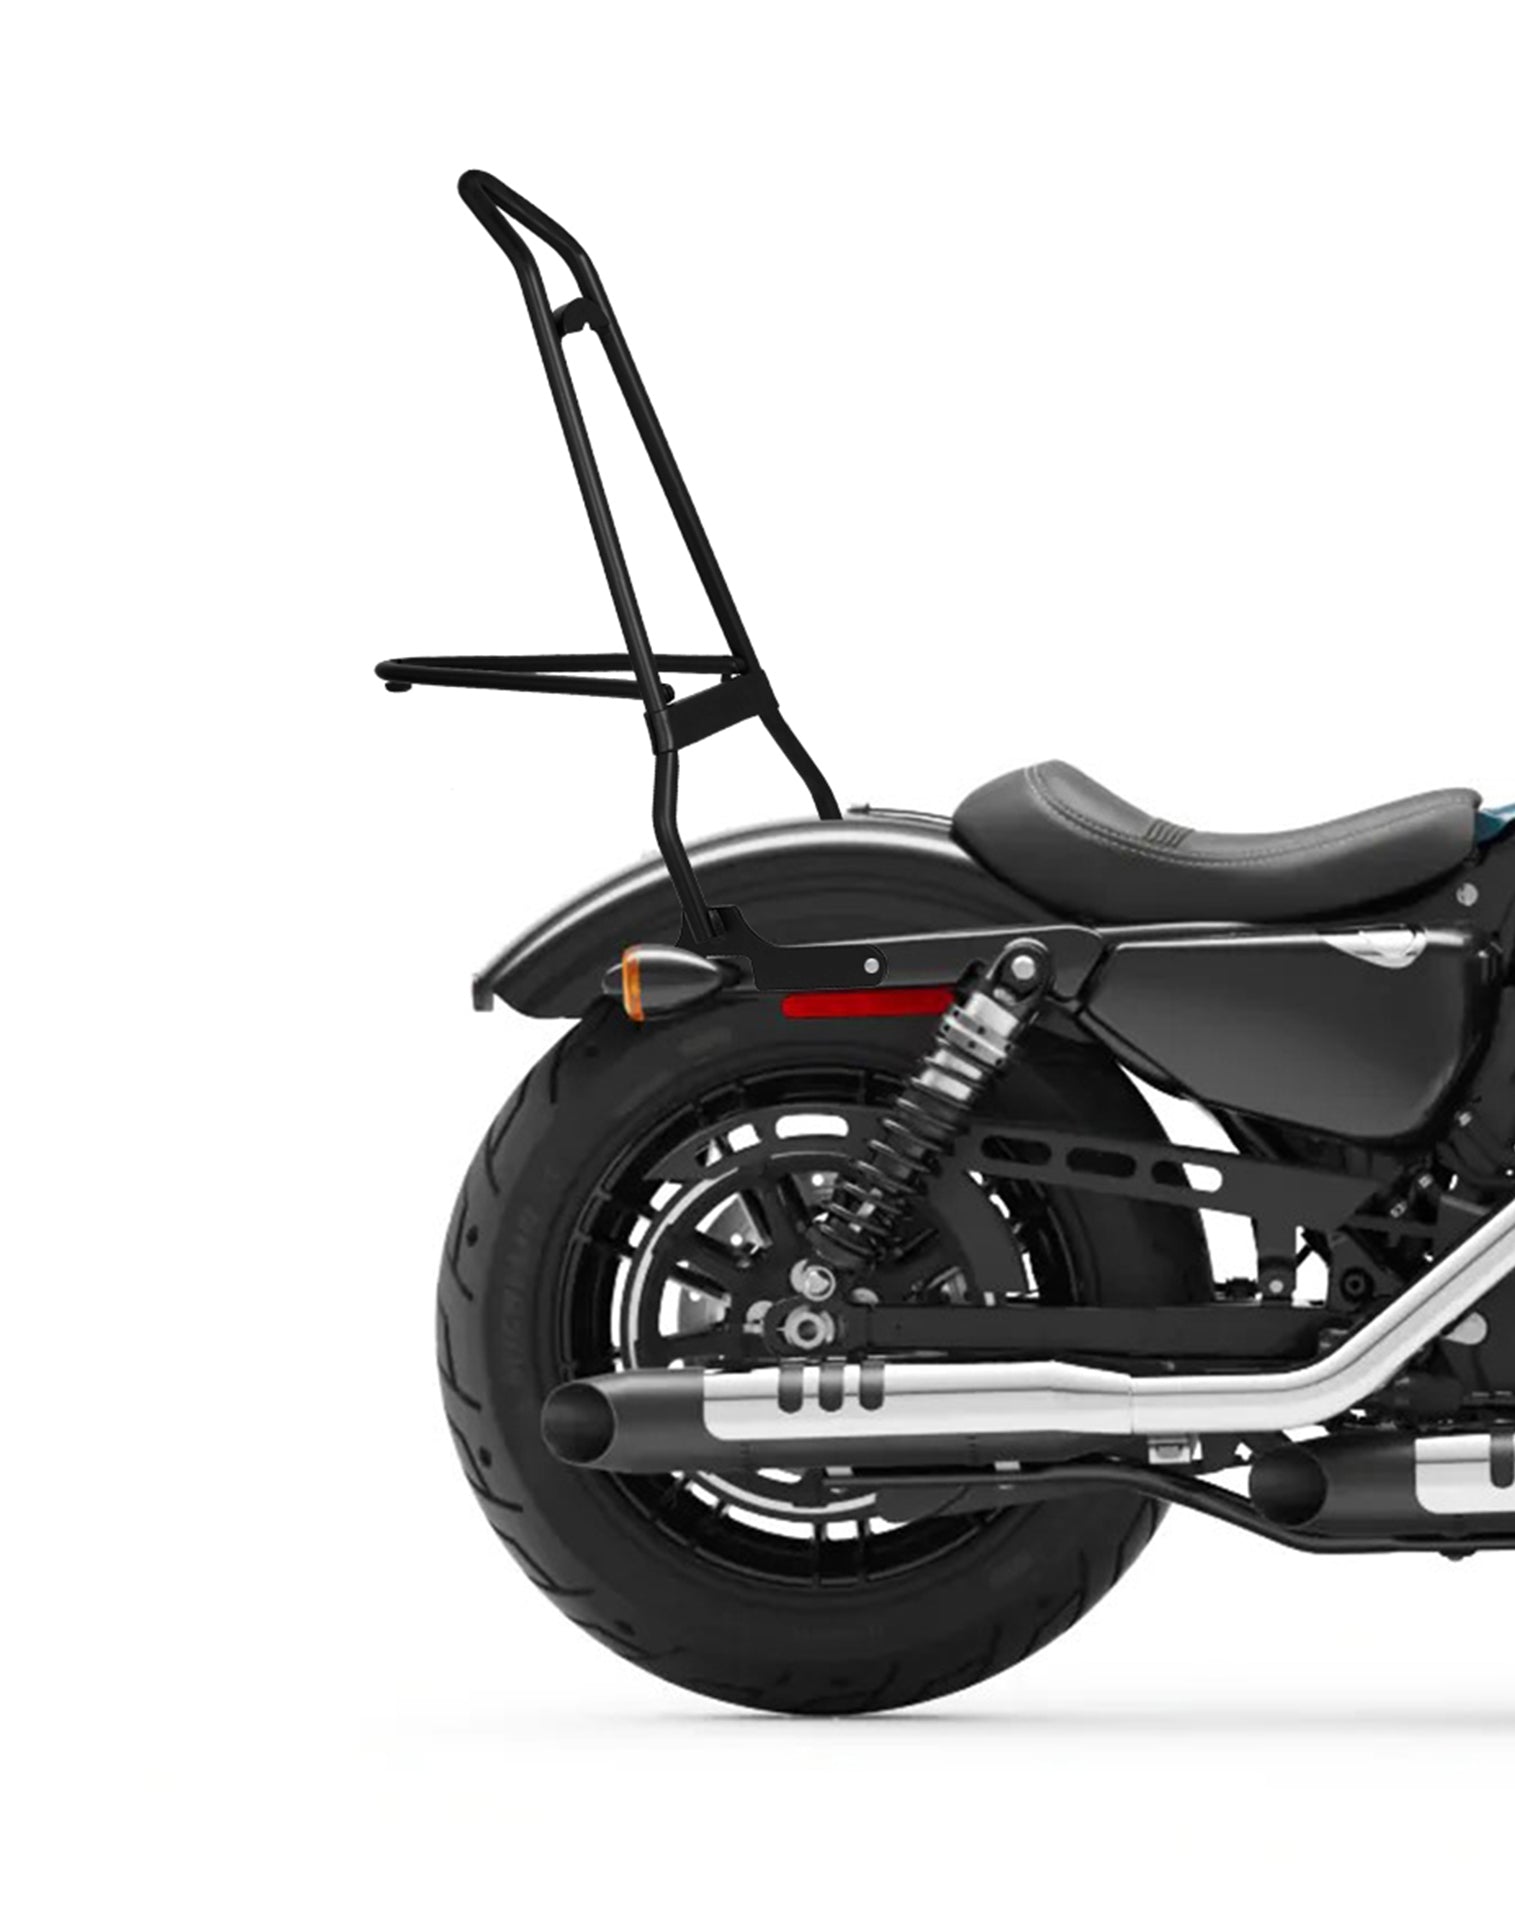 Iron Born Sissy Bar with Foldable Luggage Rack for Harley Sportster Forty Eight Matte Black Close Up View